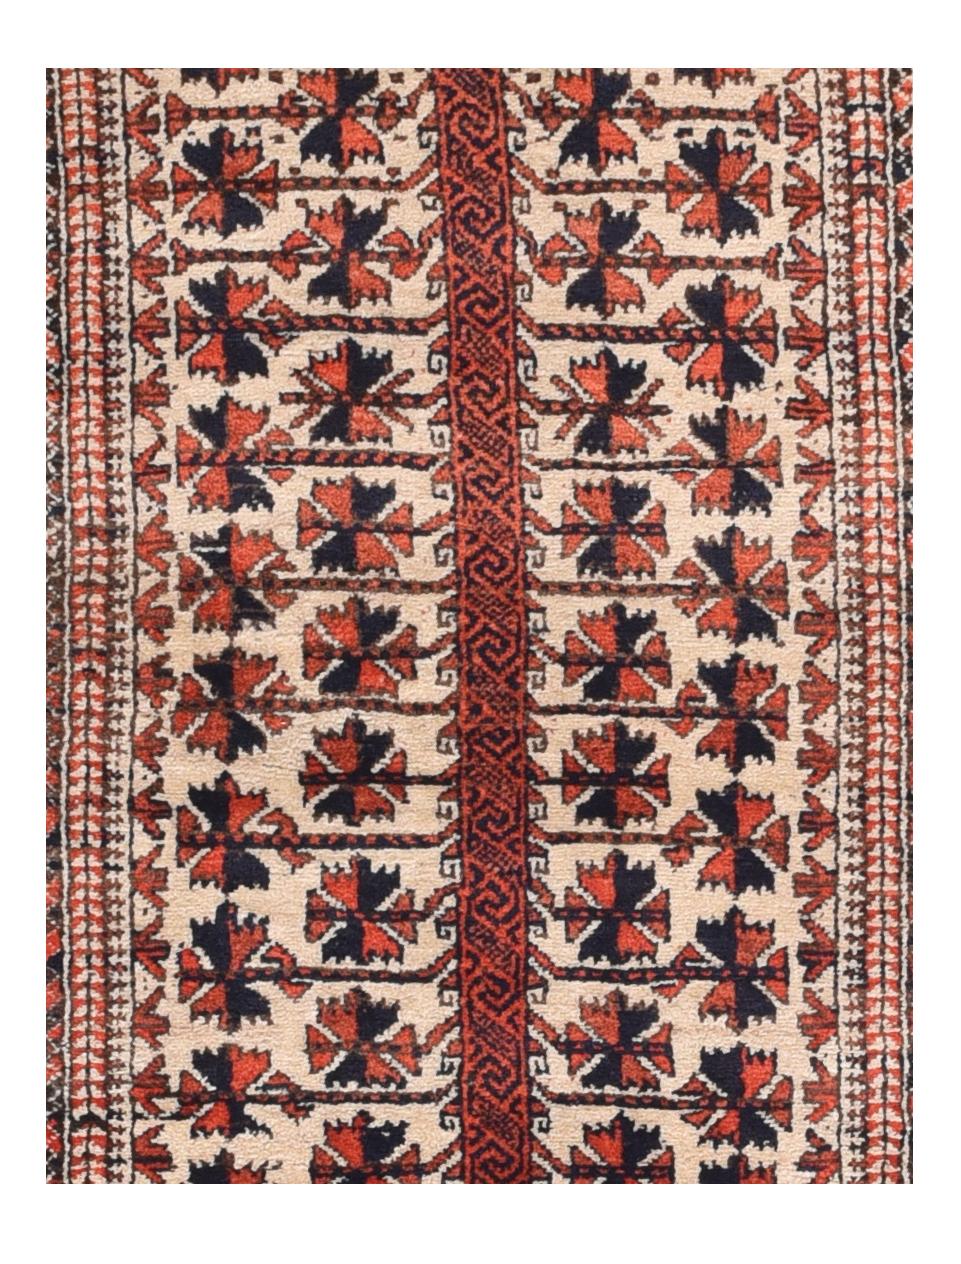 Baluchi carpets (also called Baluch or Beluchi carpets) are handmade carpets originally made by Baluch nomads, living near the border between Iran, Pakistan and Afghanistan. These nomads also occur in a smaller scale in Bahrain and in the Punjab